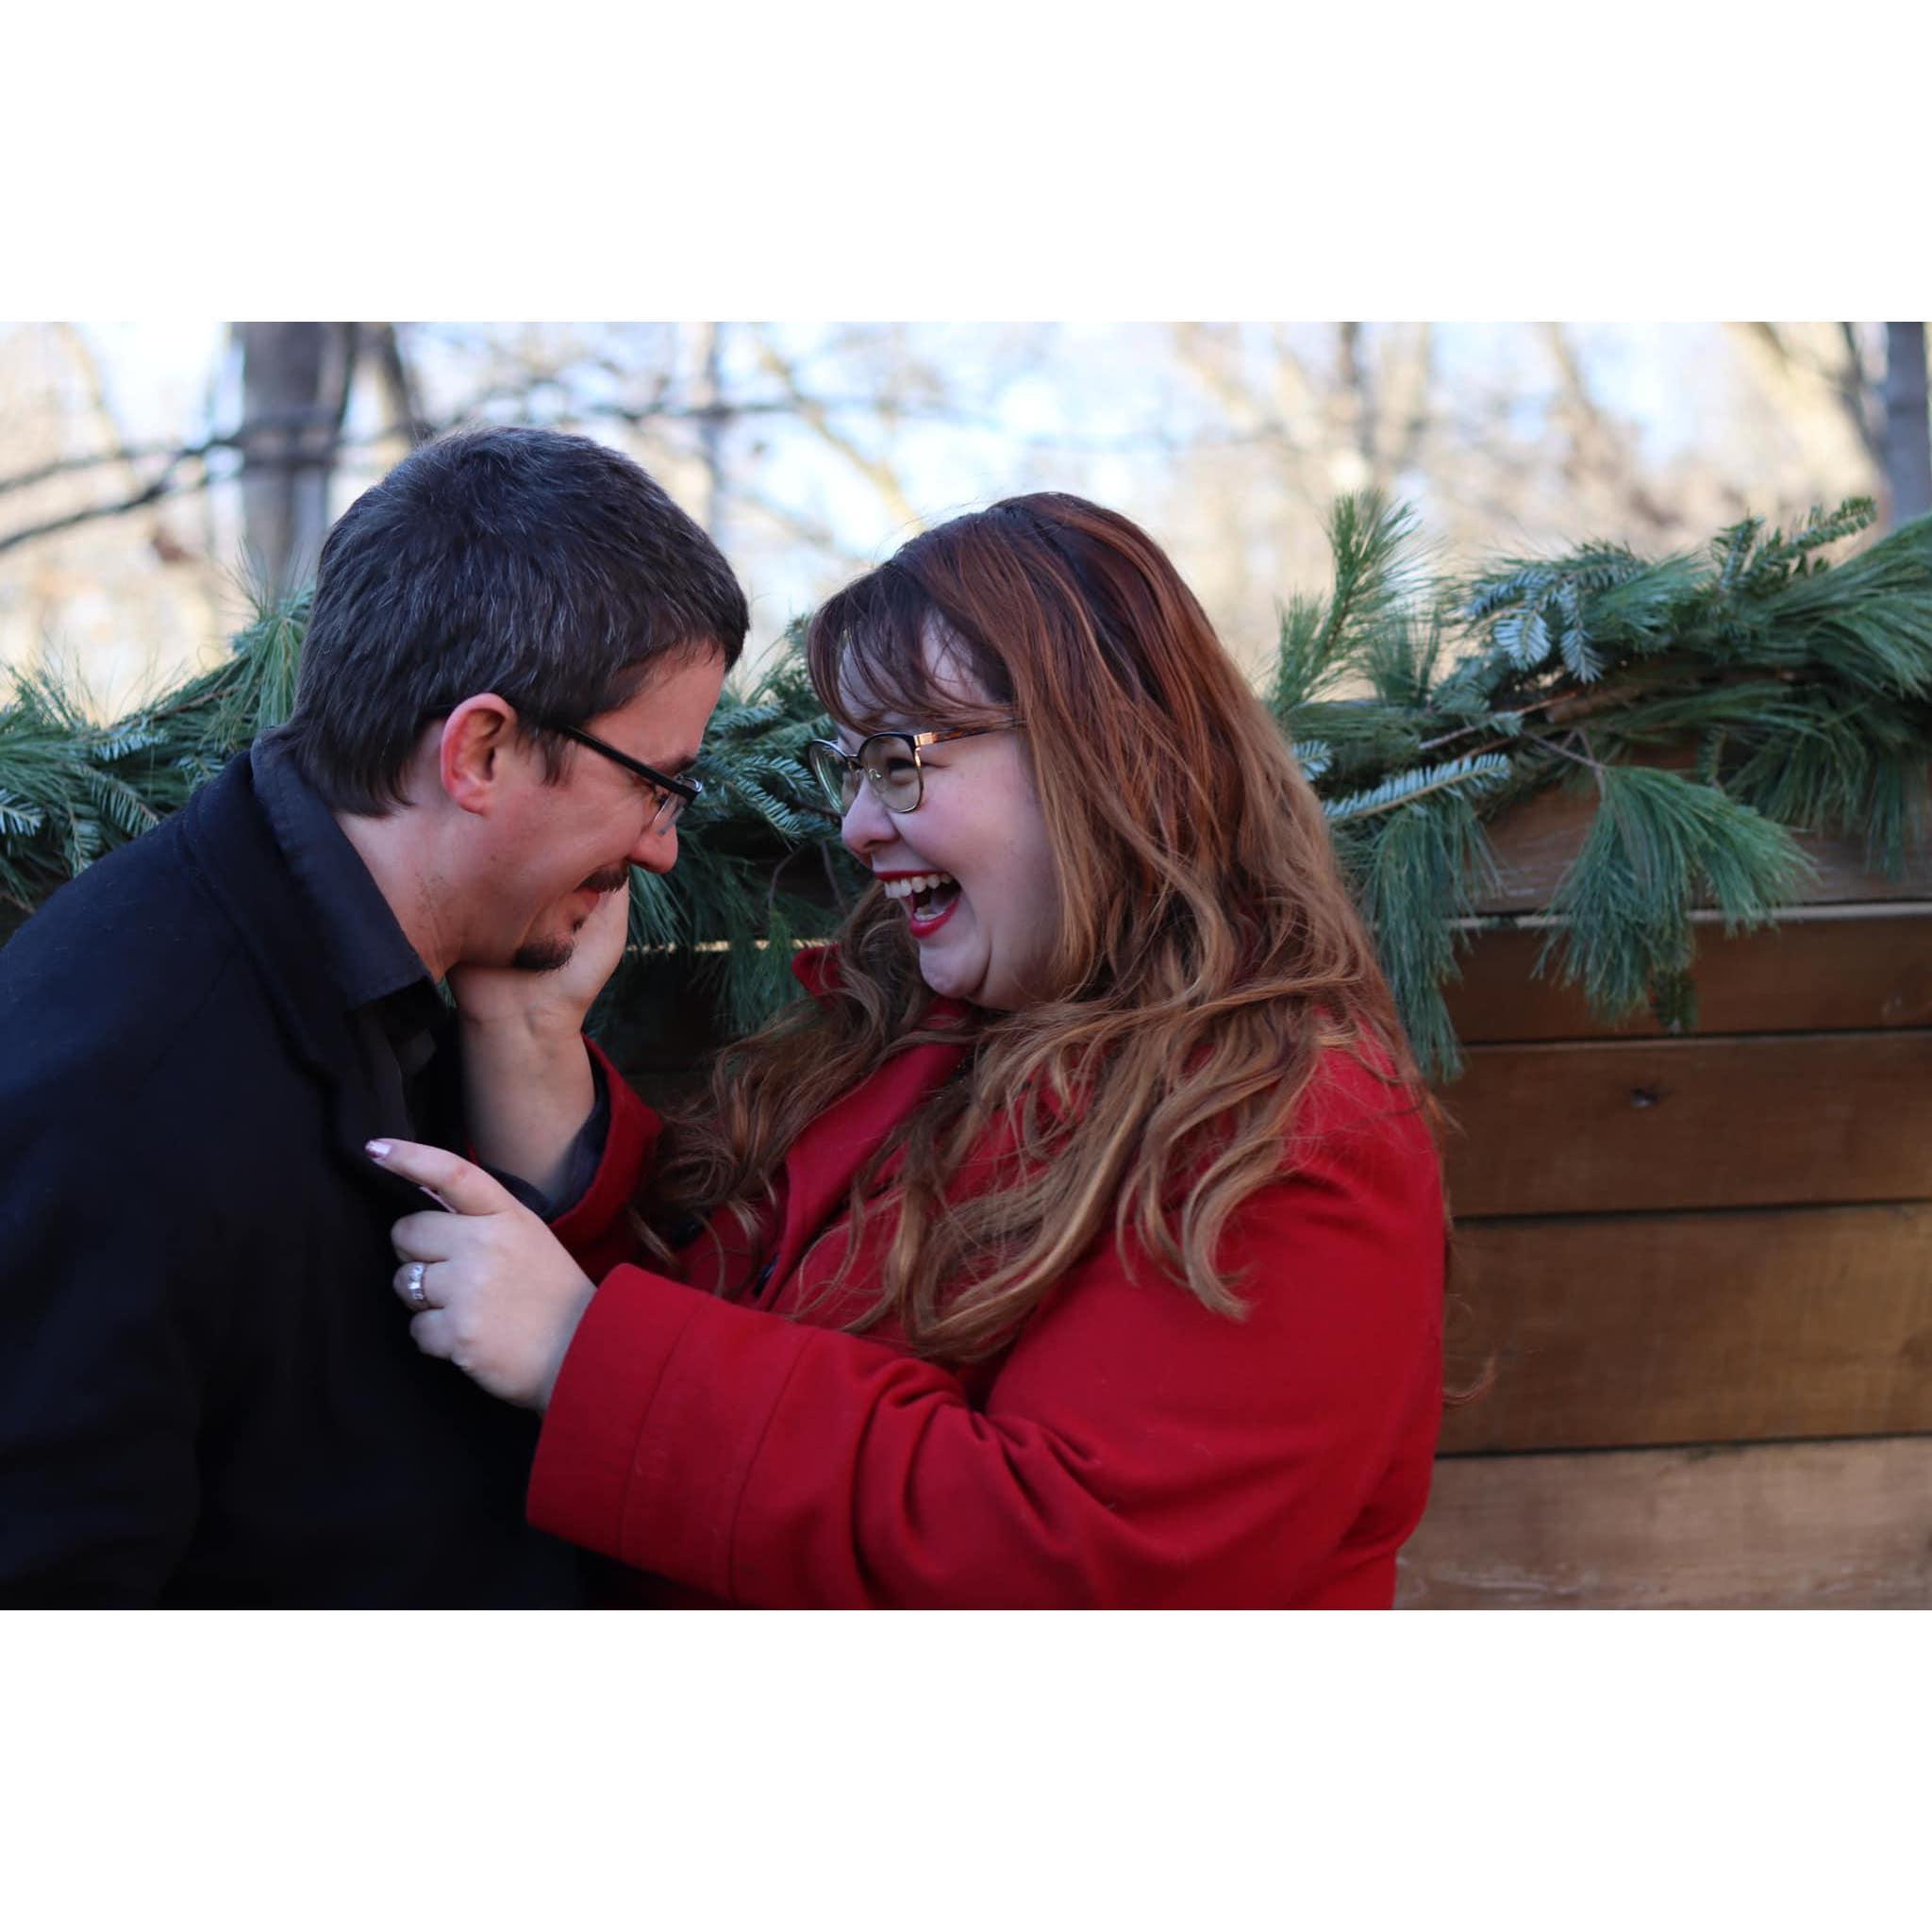 Our photographer, Kristin, had just instructed us to kiss, and my (Kara) makeup had come off on Joey's mouth.  He asked me, "Am I pretty?" - Clearly I found that hilarious.